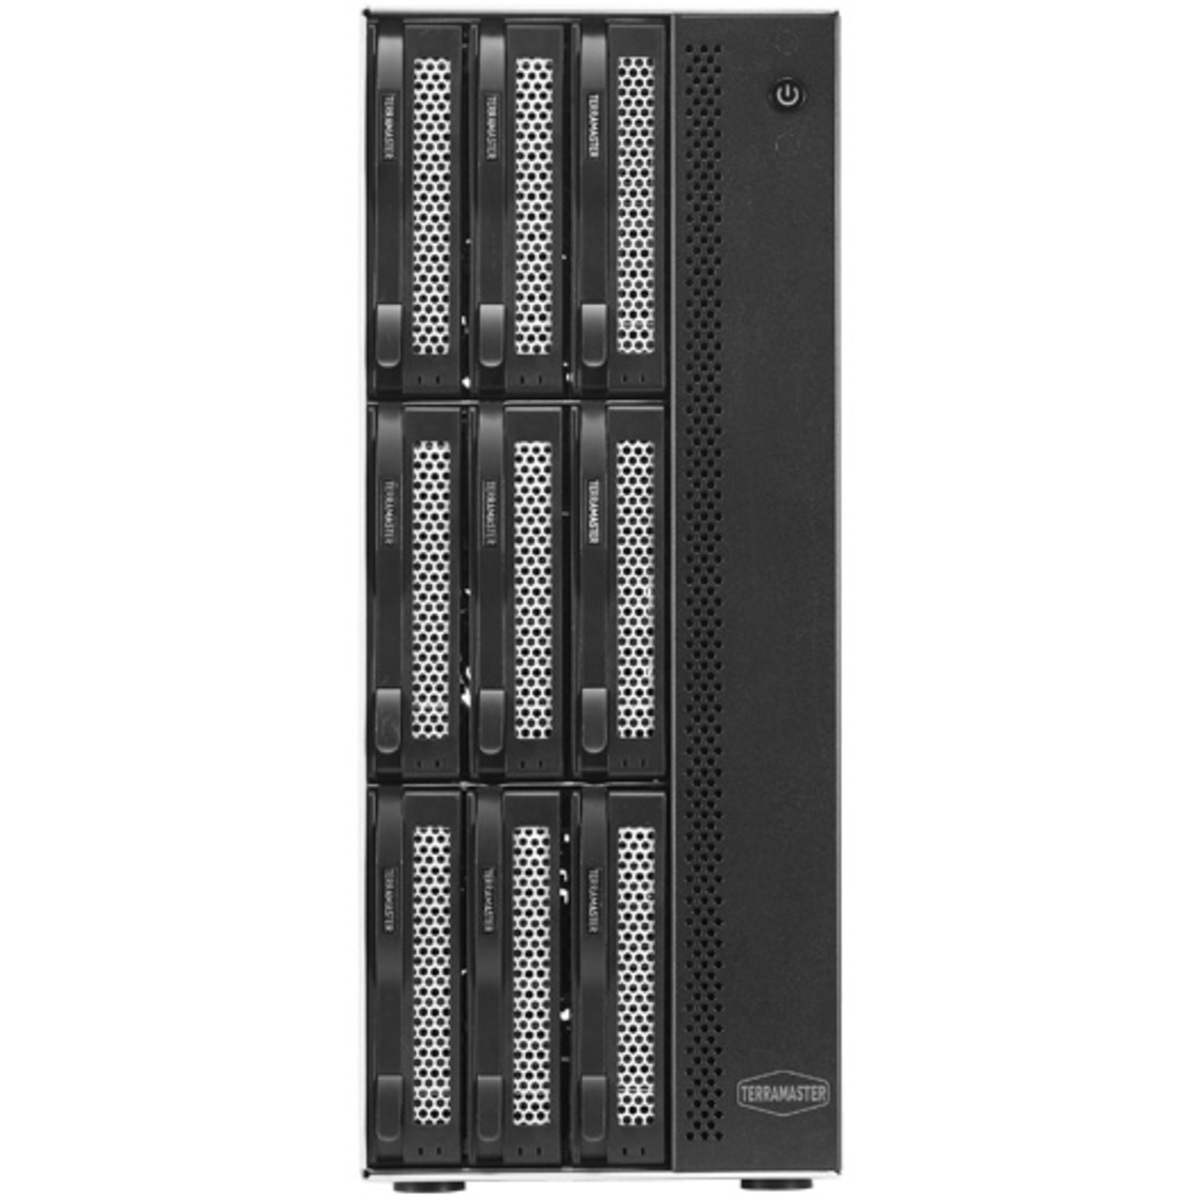 TerraMaster T9-423 50tb 9-Bay Desktop Multimedia / Power User / Business NAS - Network Attached Storage Device 5x10tb Seagate IronWolf Pro ST10000NT001 3.5 7200rpm SATA 6Gb/s HDD NAS Class Drives Installed - Burn-In Tested - ON SALE T9-423